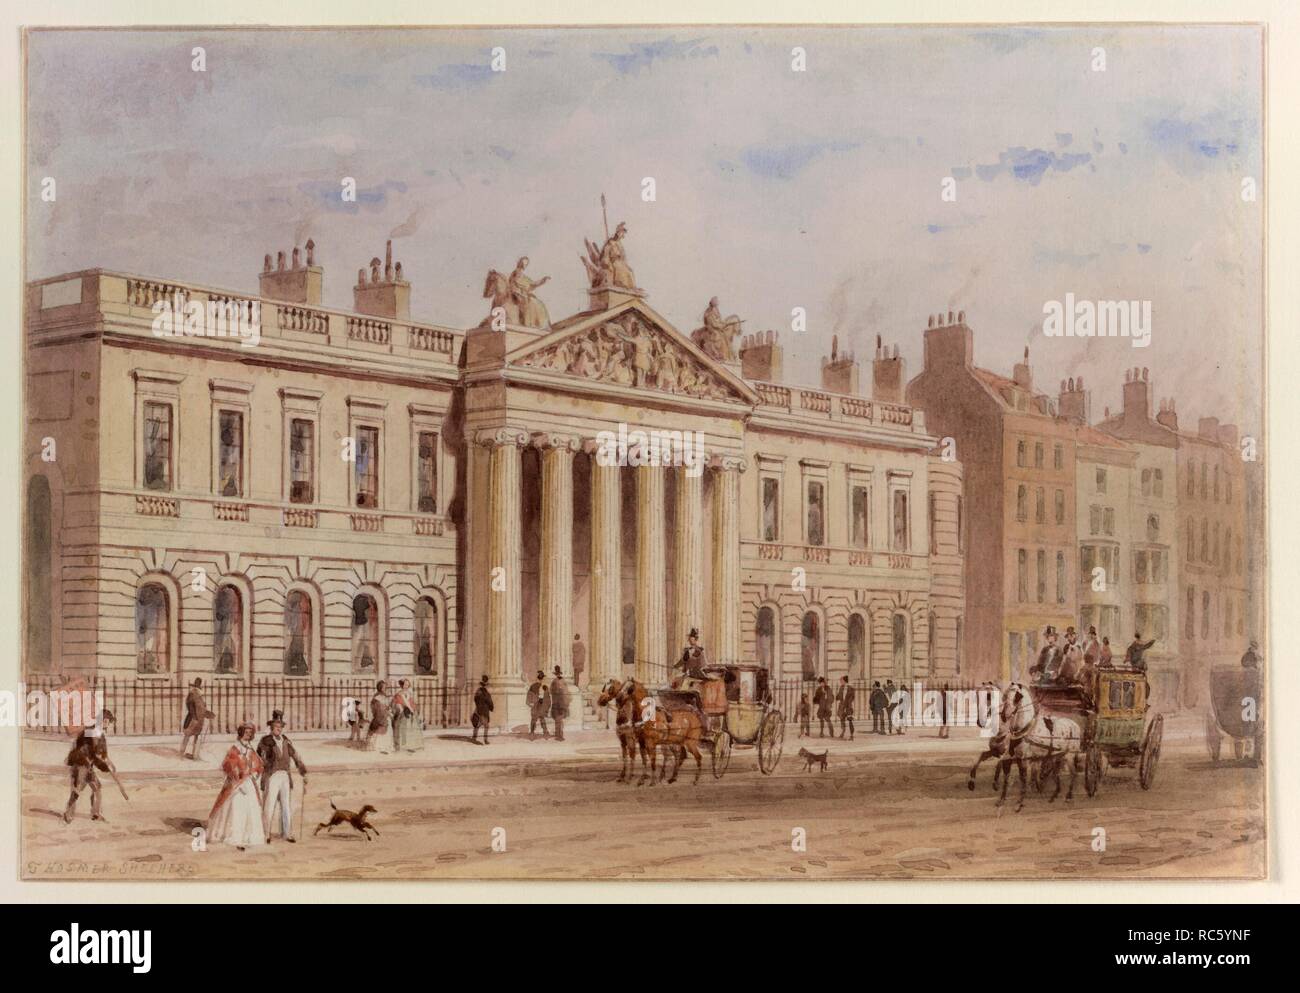 East India House, Leadenhall Street, London. The costume of the figures in the foreground corresponds with the fashions of 1825-30. The placard carried by a figure on the left is lettered: â€˜London in the nineteenth centuryâ€™. c.1825. watercolour. Source: WD 2881. Author: SHEPHERD, THOMAS HOSMER. Stock Photo